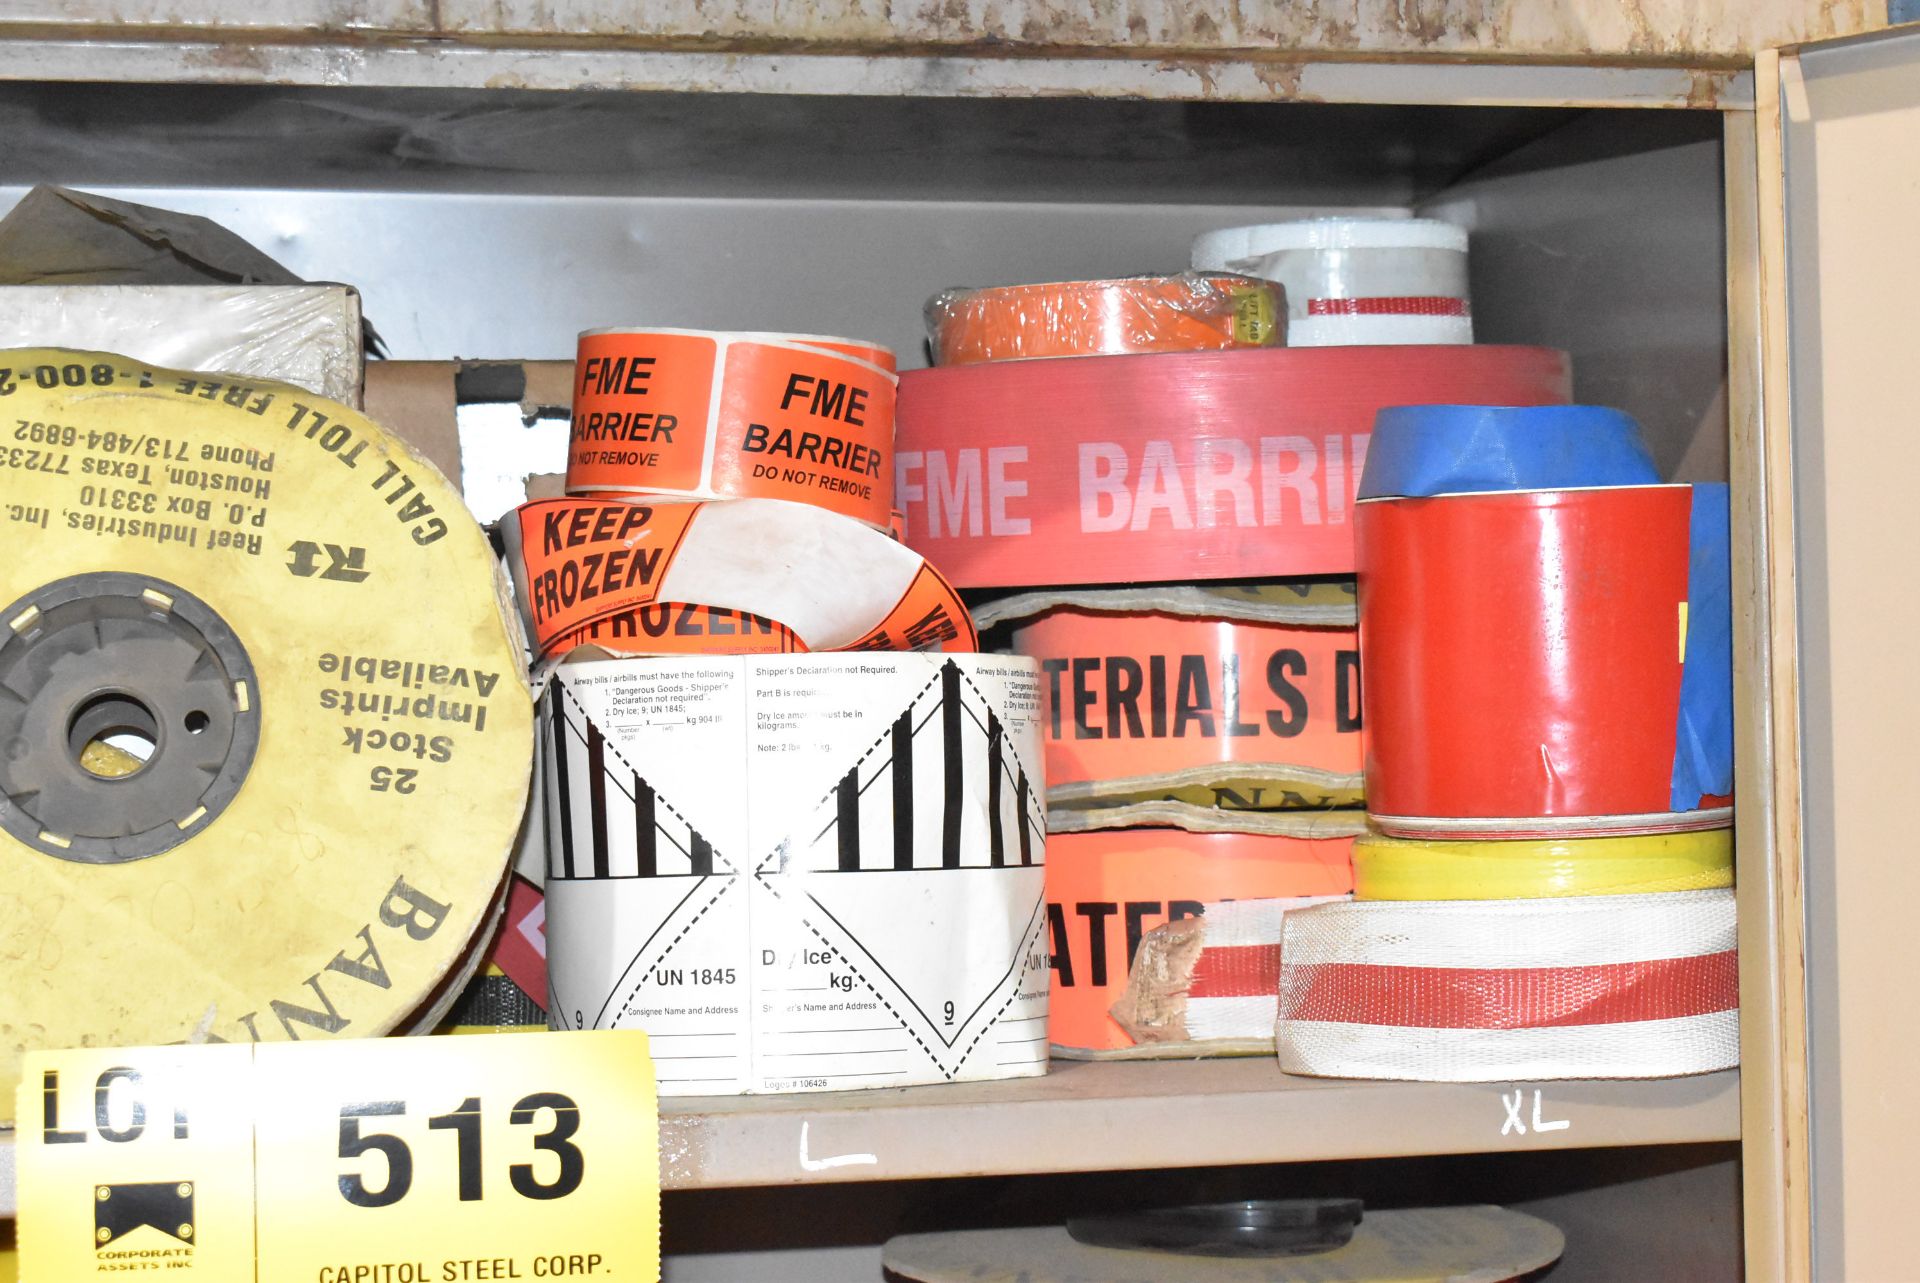 LOT/ CONTENTS OF SHELF - SAFETY TAPE - Image 3 of 3